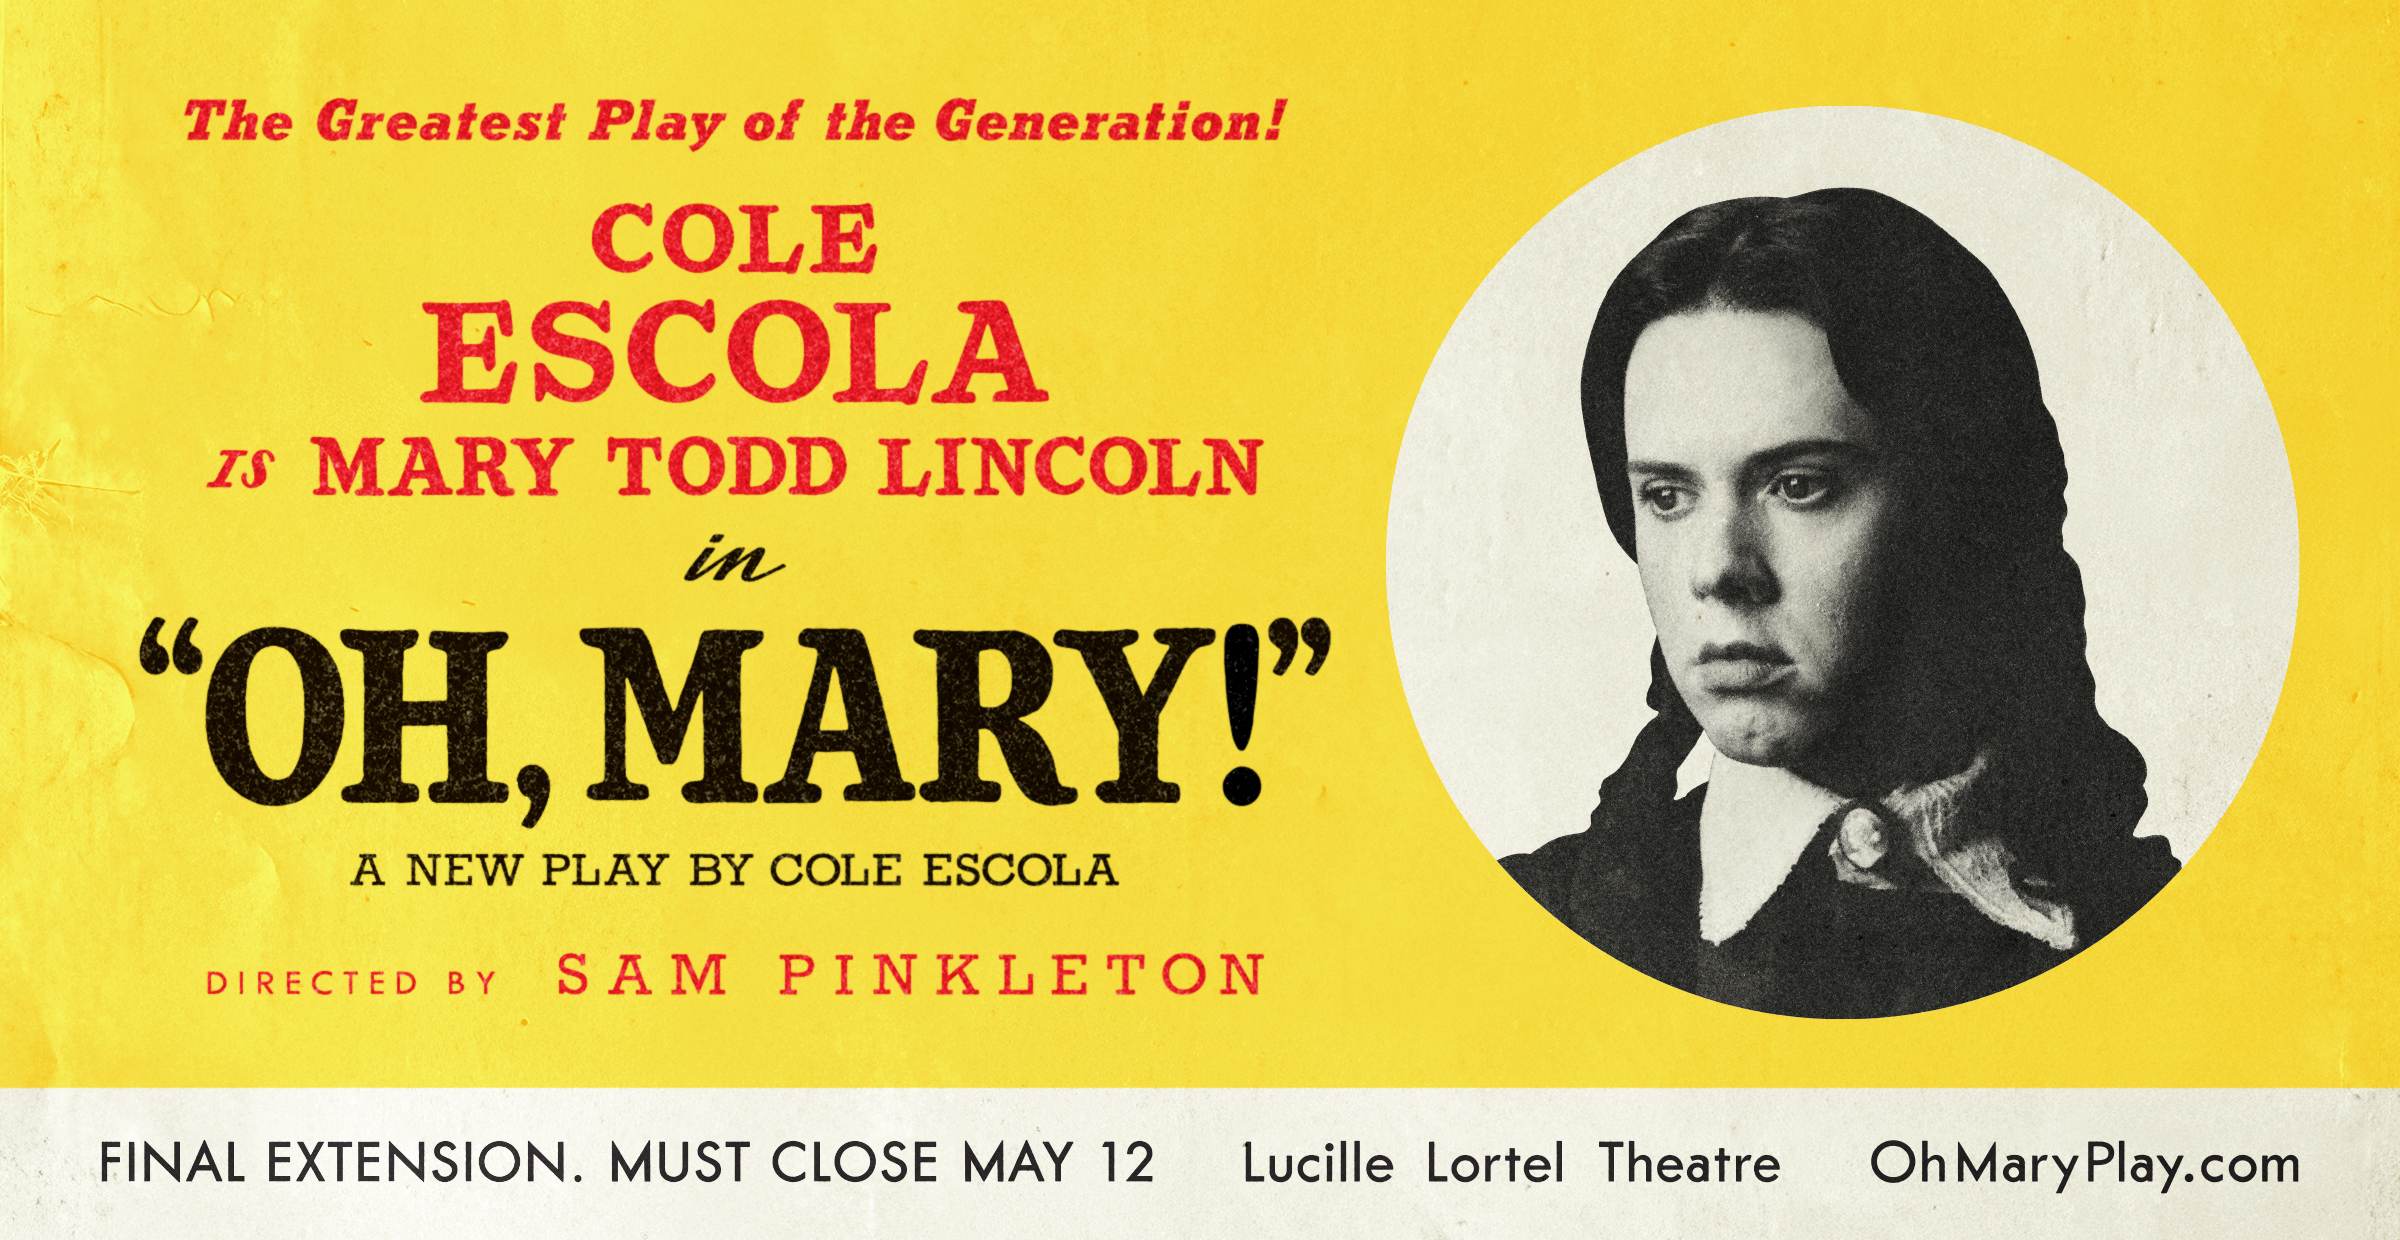 Oh Mary! has been extended until May 12th at the Lucille Lortel Theatre